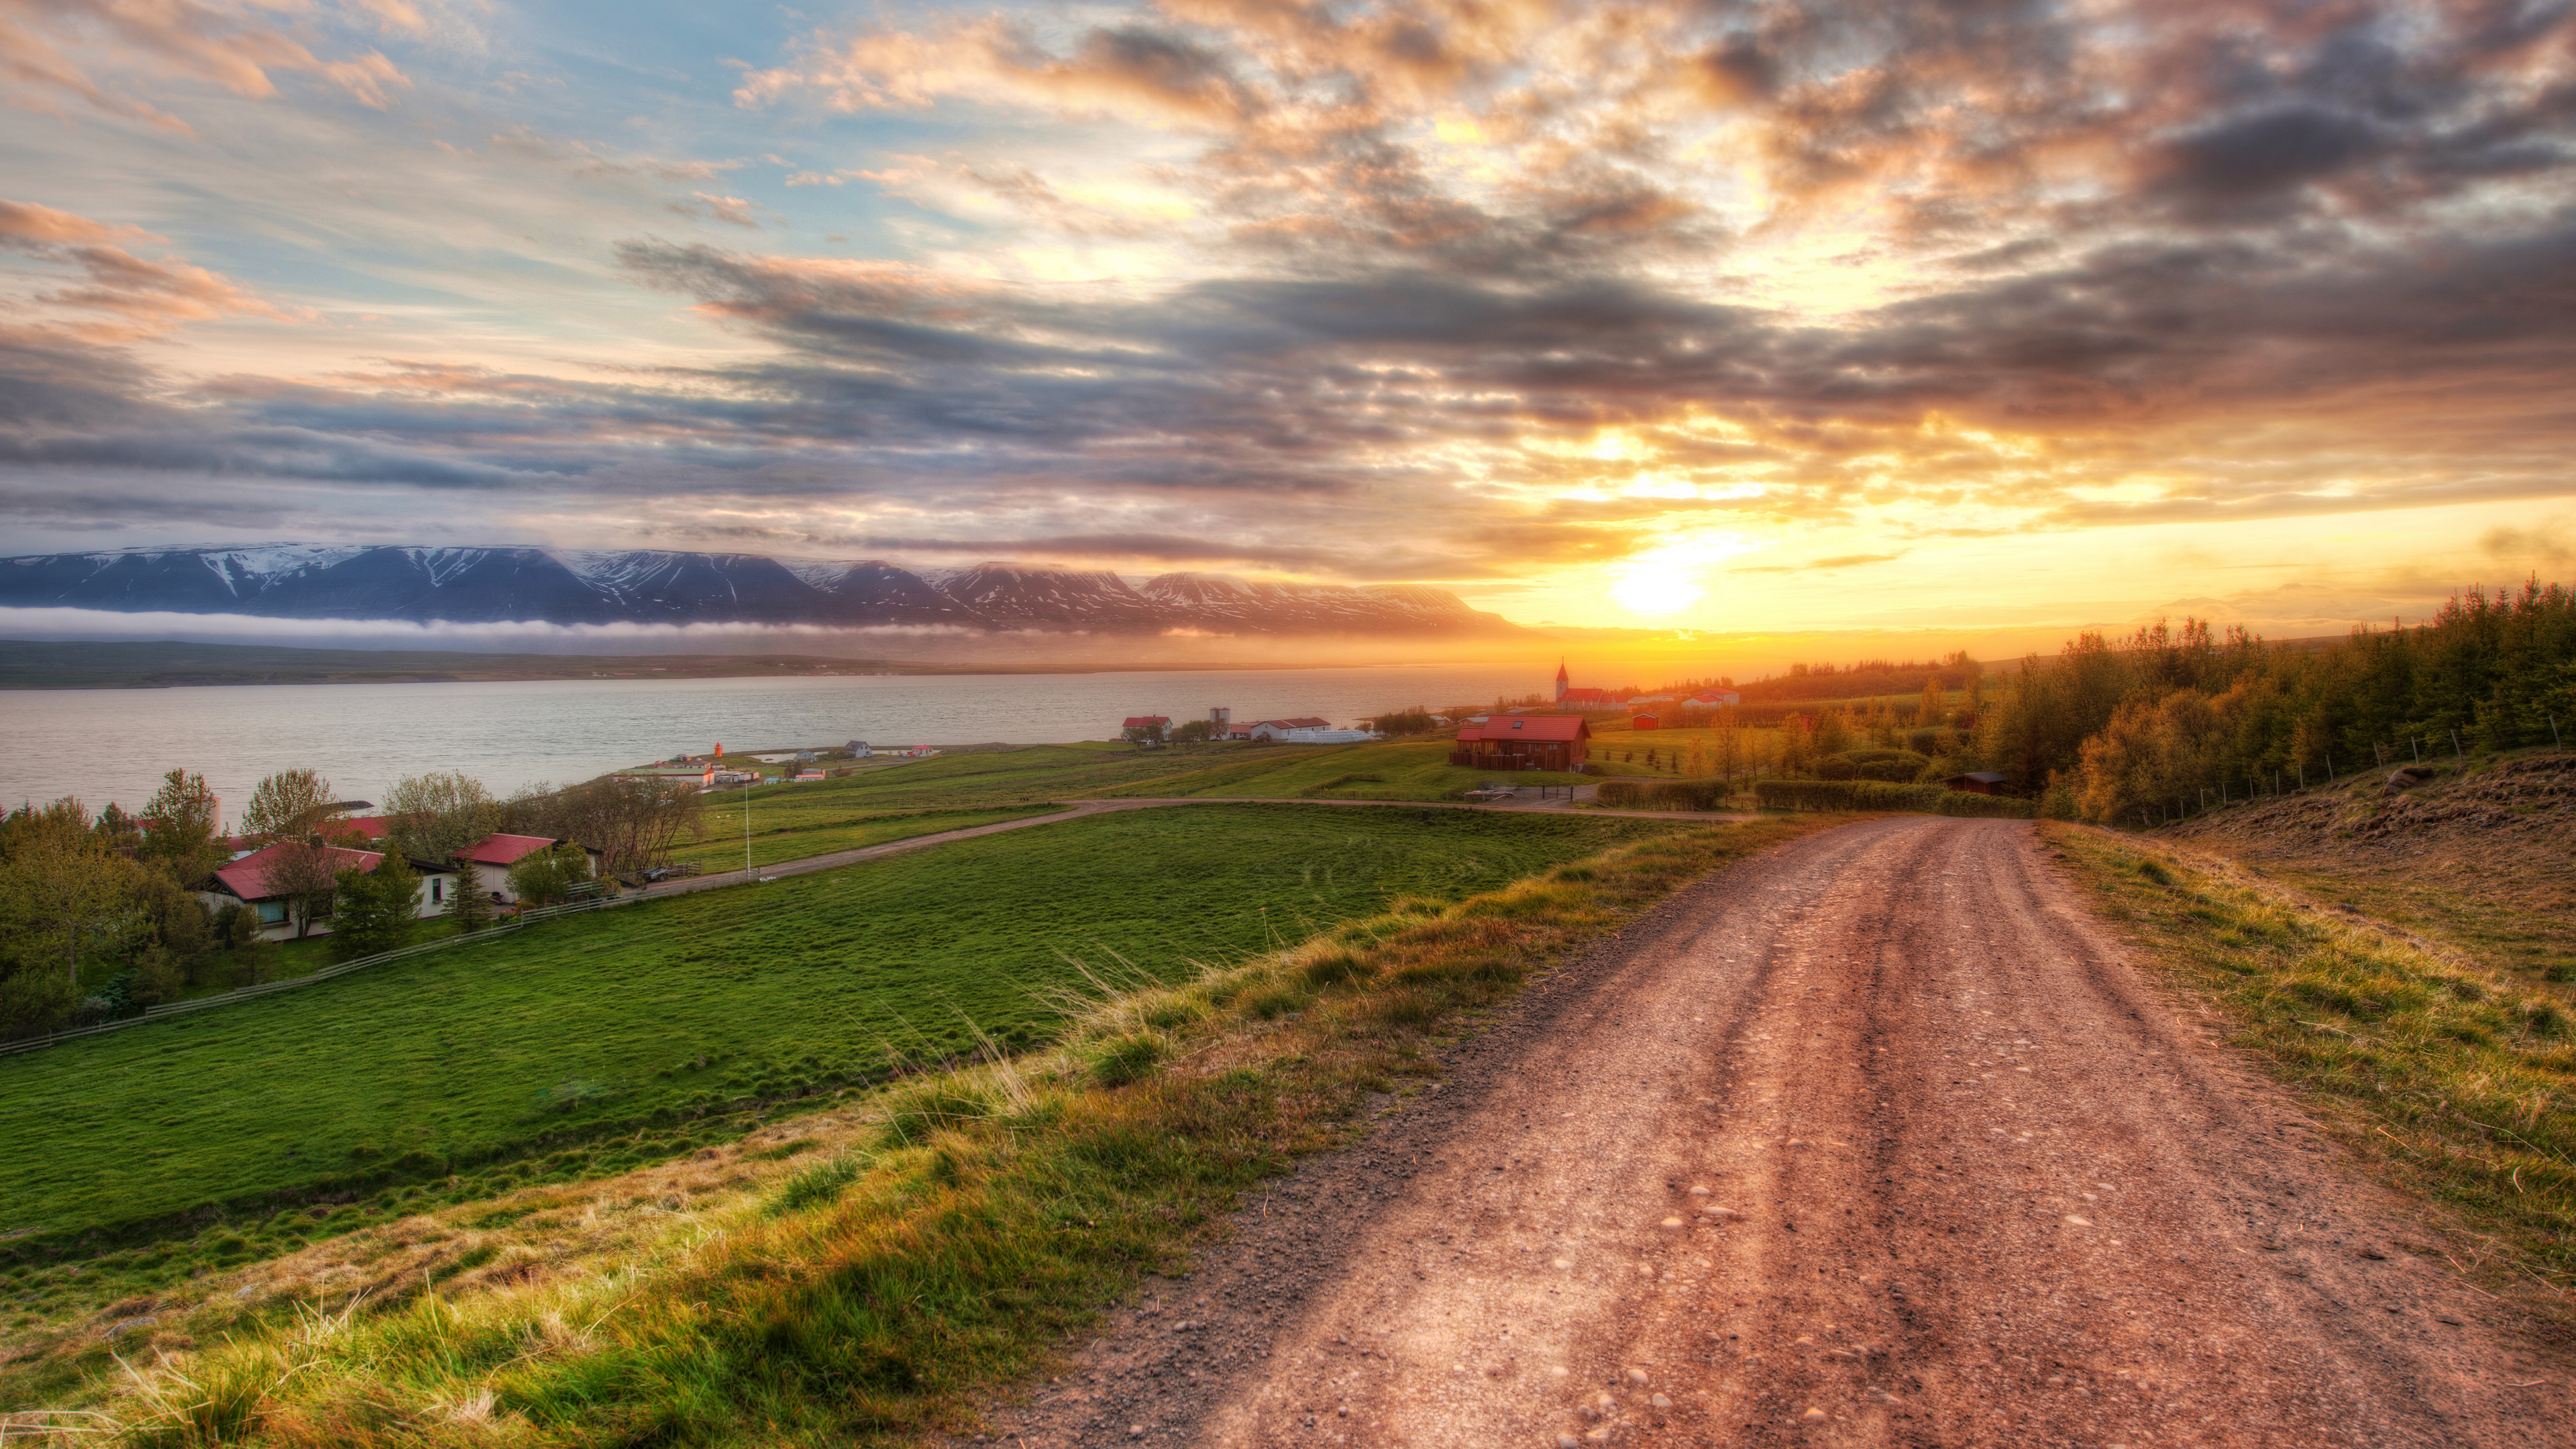 General 3840x2160 landscape Iceland Trey Ratcliff photography nature mountain chain water field village road trees clouds sunset sunset glow sky HDR